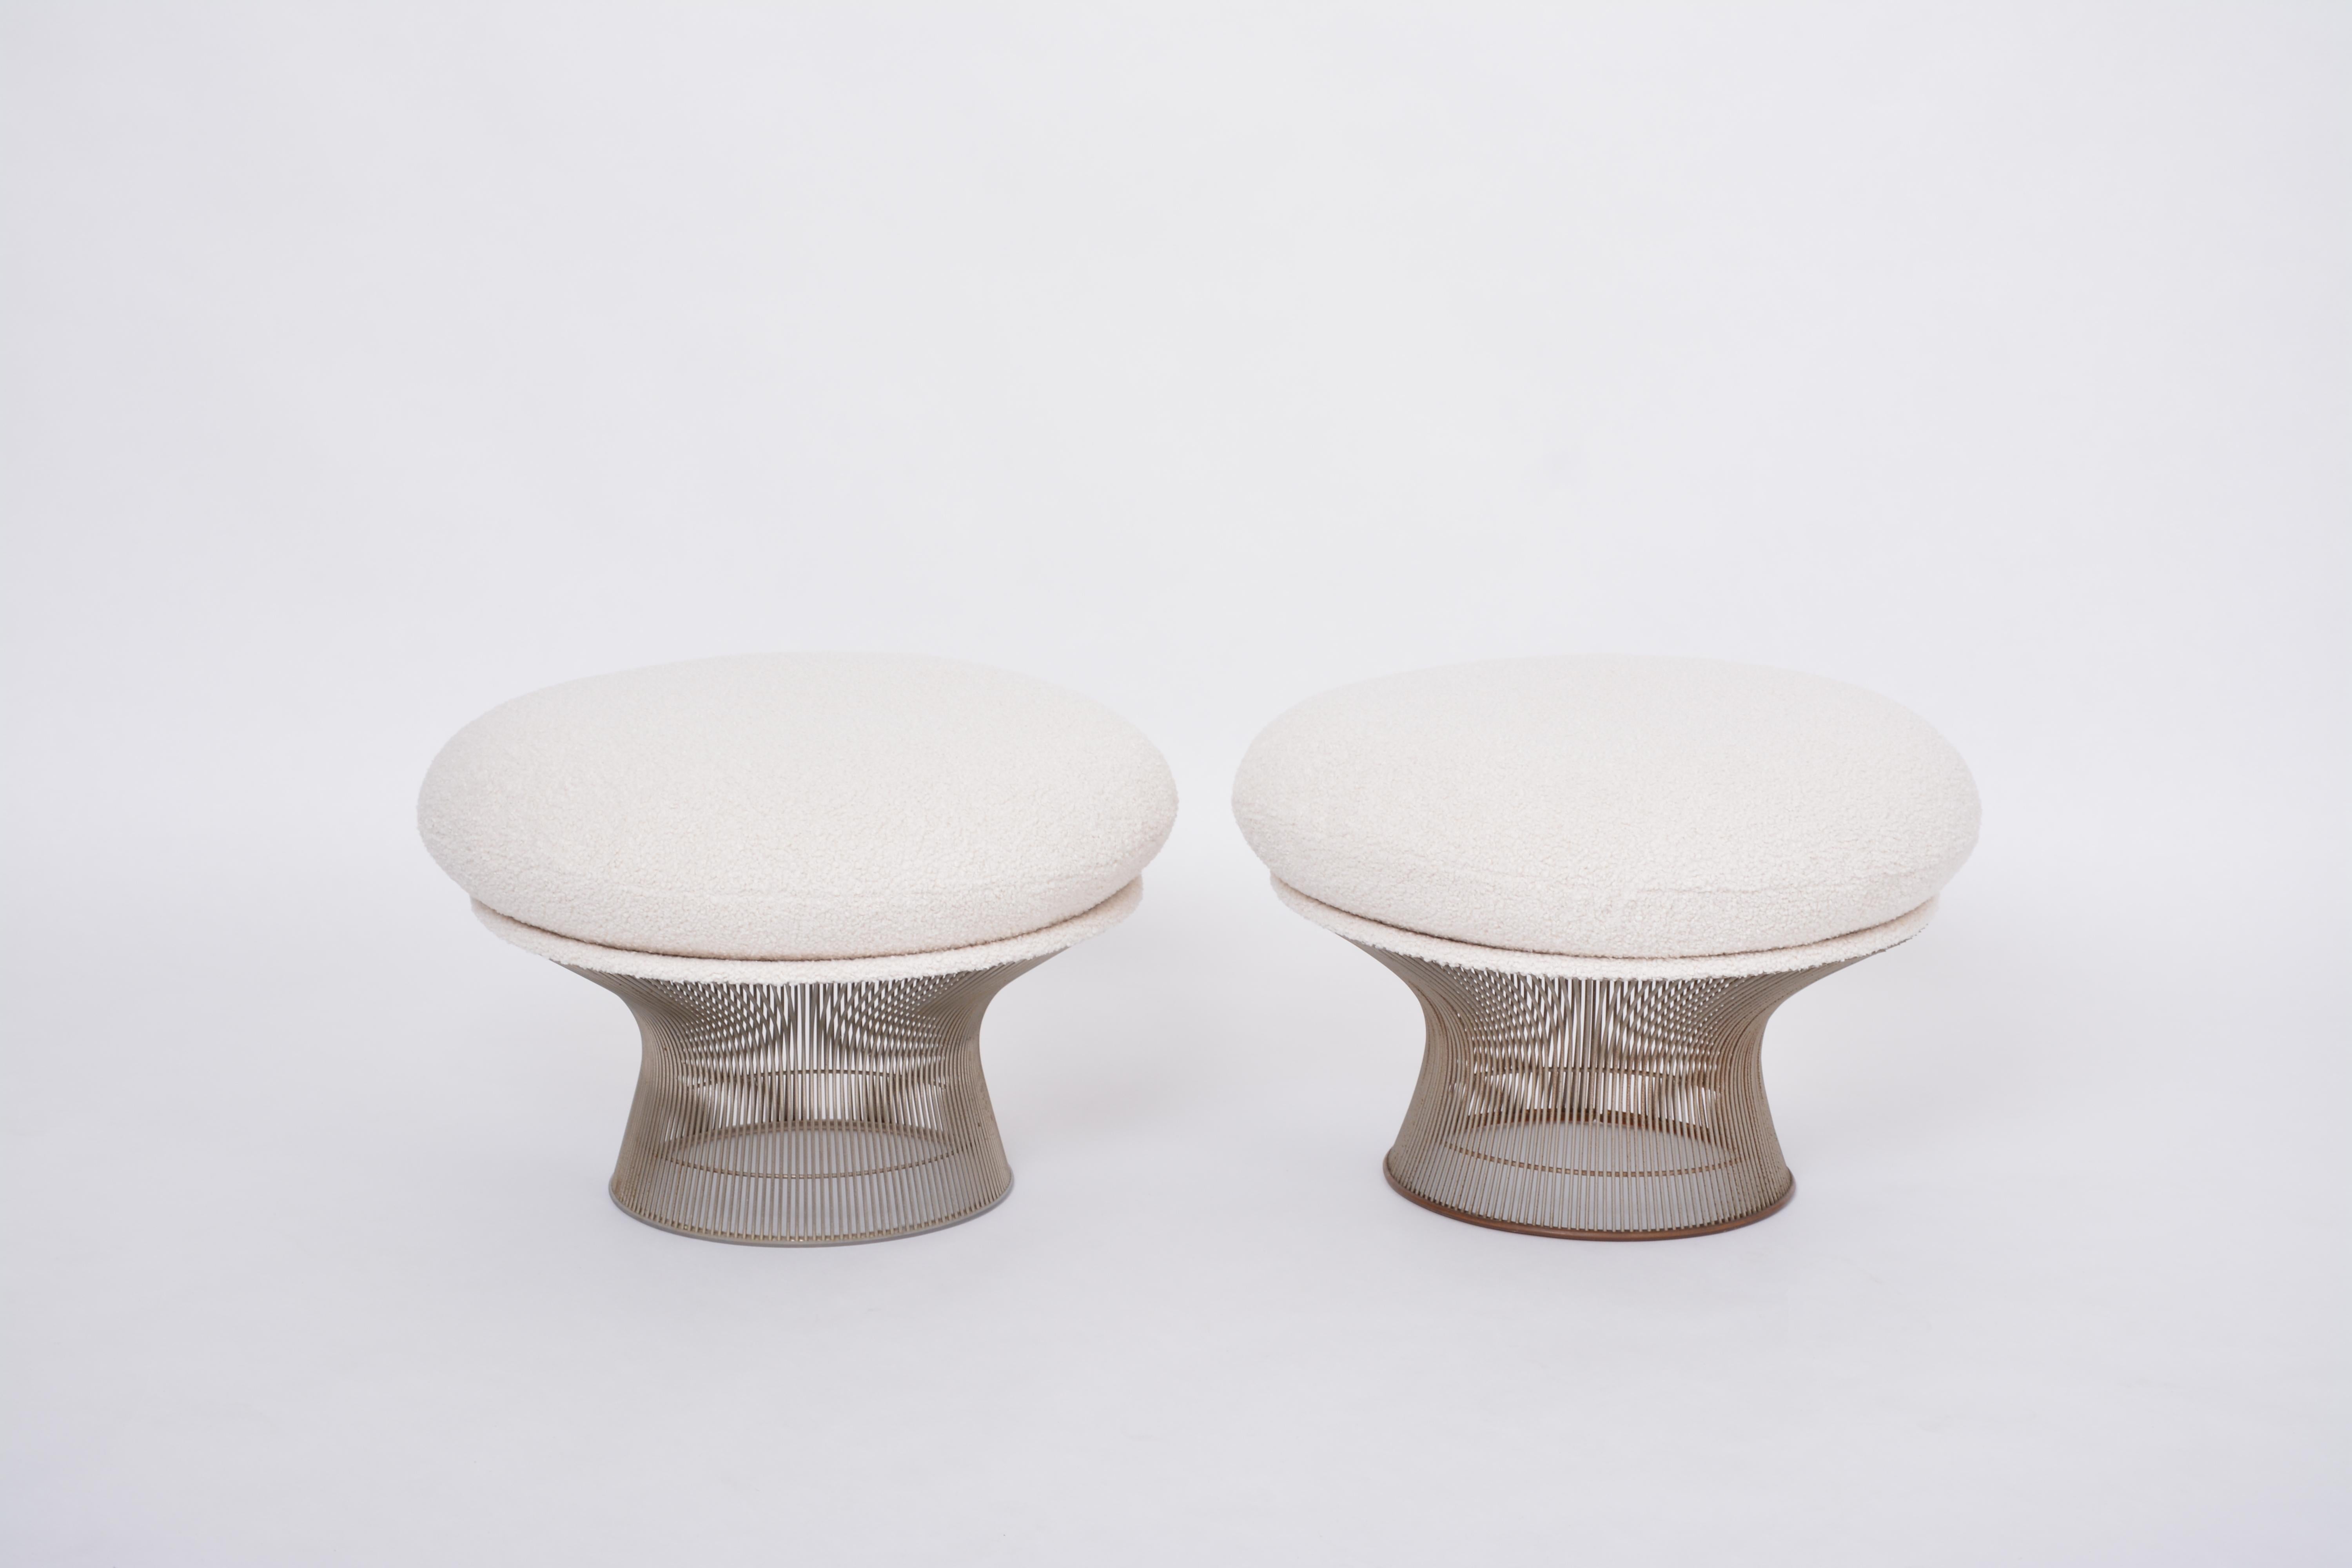 Pair of reupholstered vintage Mid-century ottomans by Warren Platner for Knoll
In 1966, Warren Platner designed his now iconic collection of pieces of furniture for Knoll that have become the embodiment of timeless mid-century modern design pieces.